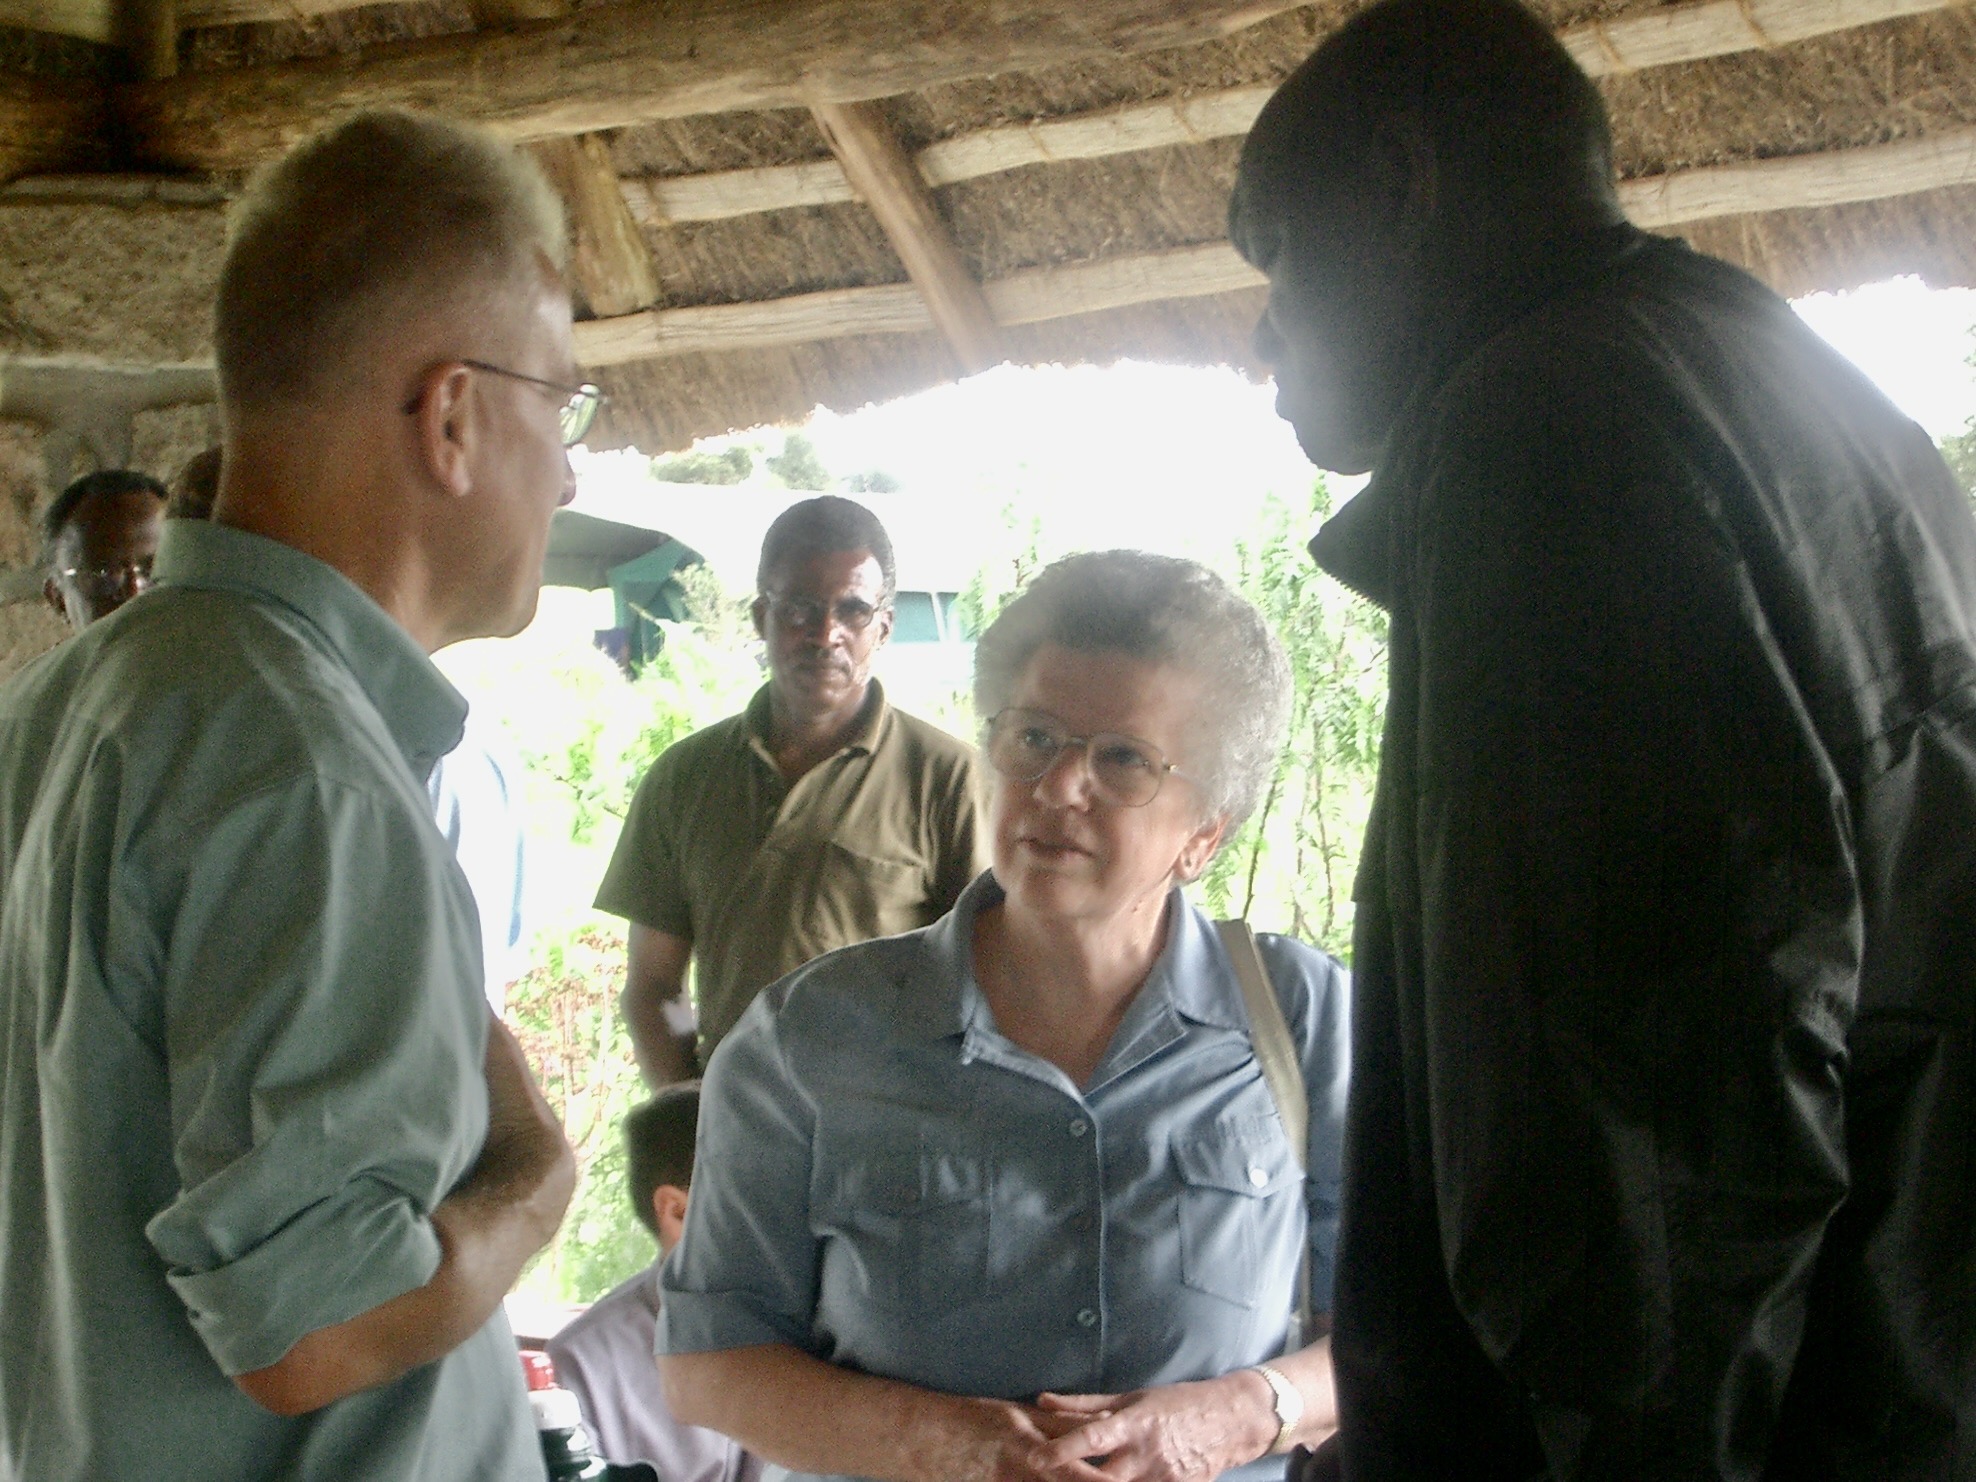 Wendy James, with her fellow teacher Peter Adwok Nyaba and a student on the Rift Valley Institute Sudan Course on the Athi Plains, Kenya, April 2004. Photograph by John Ryle.